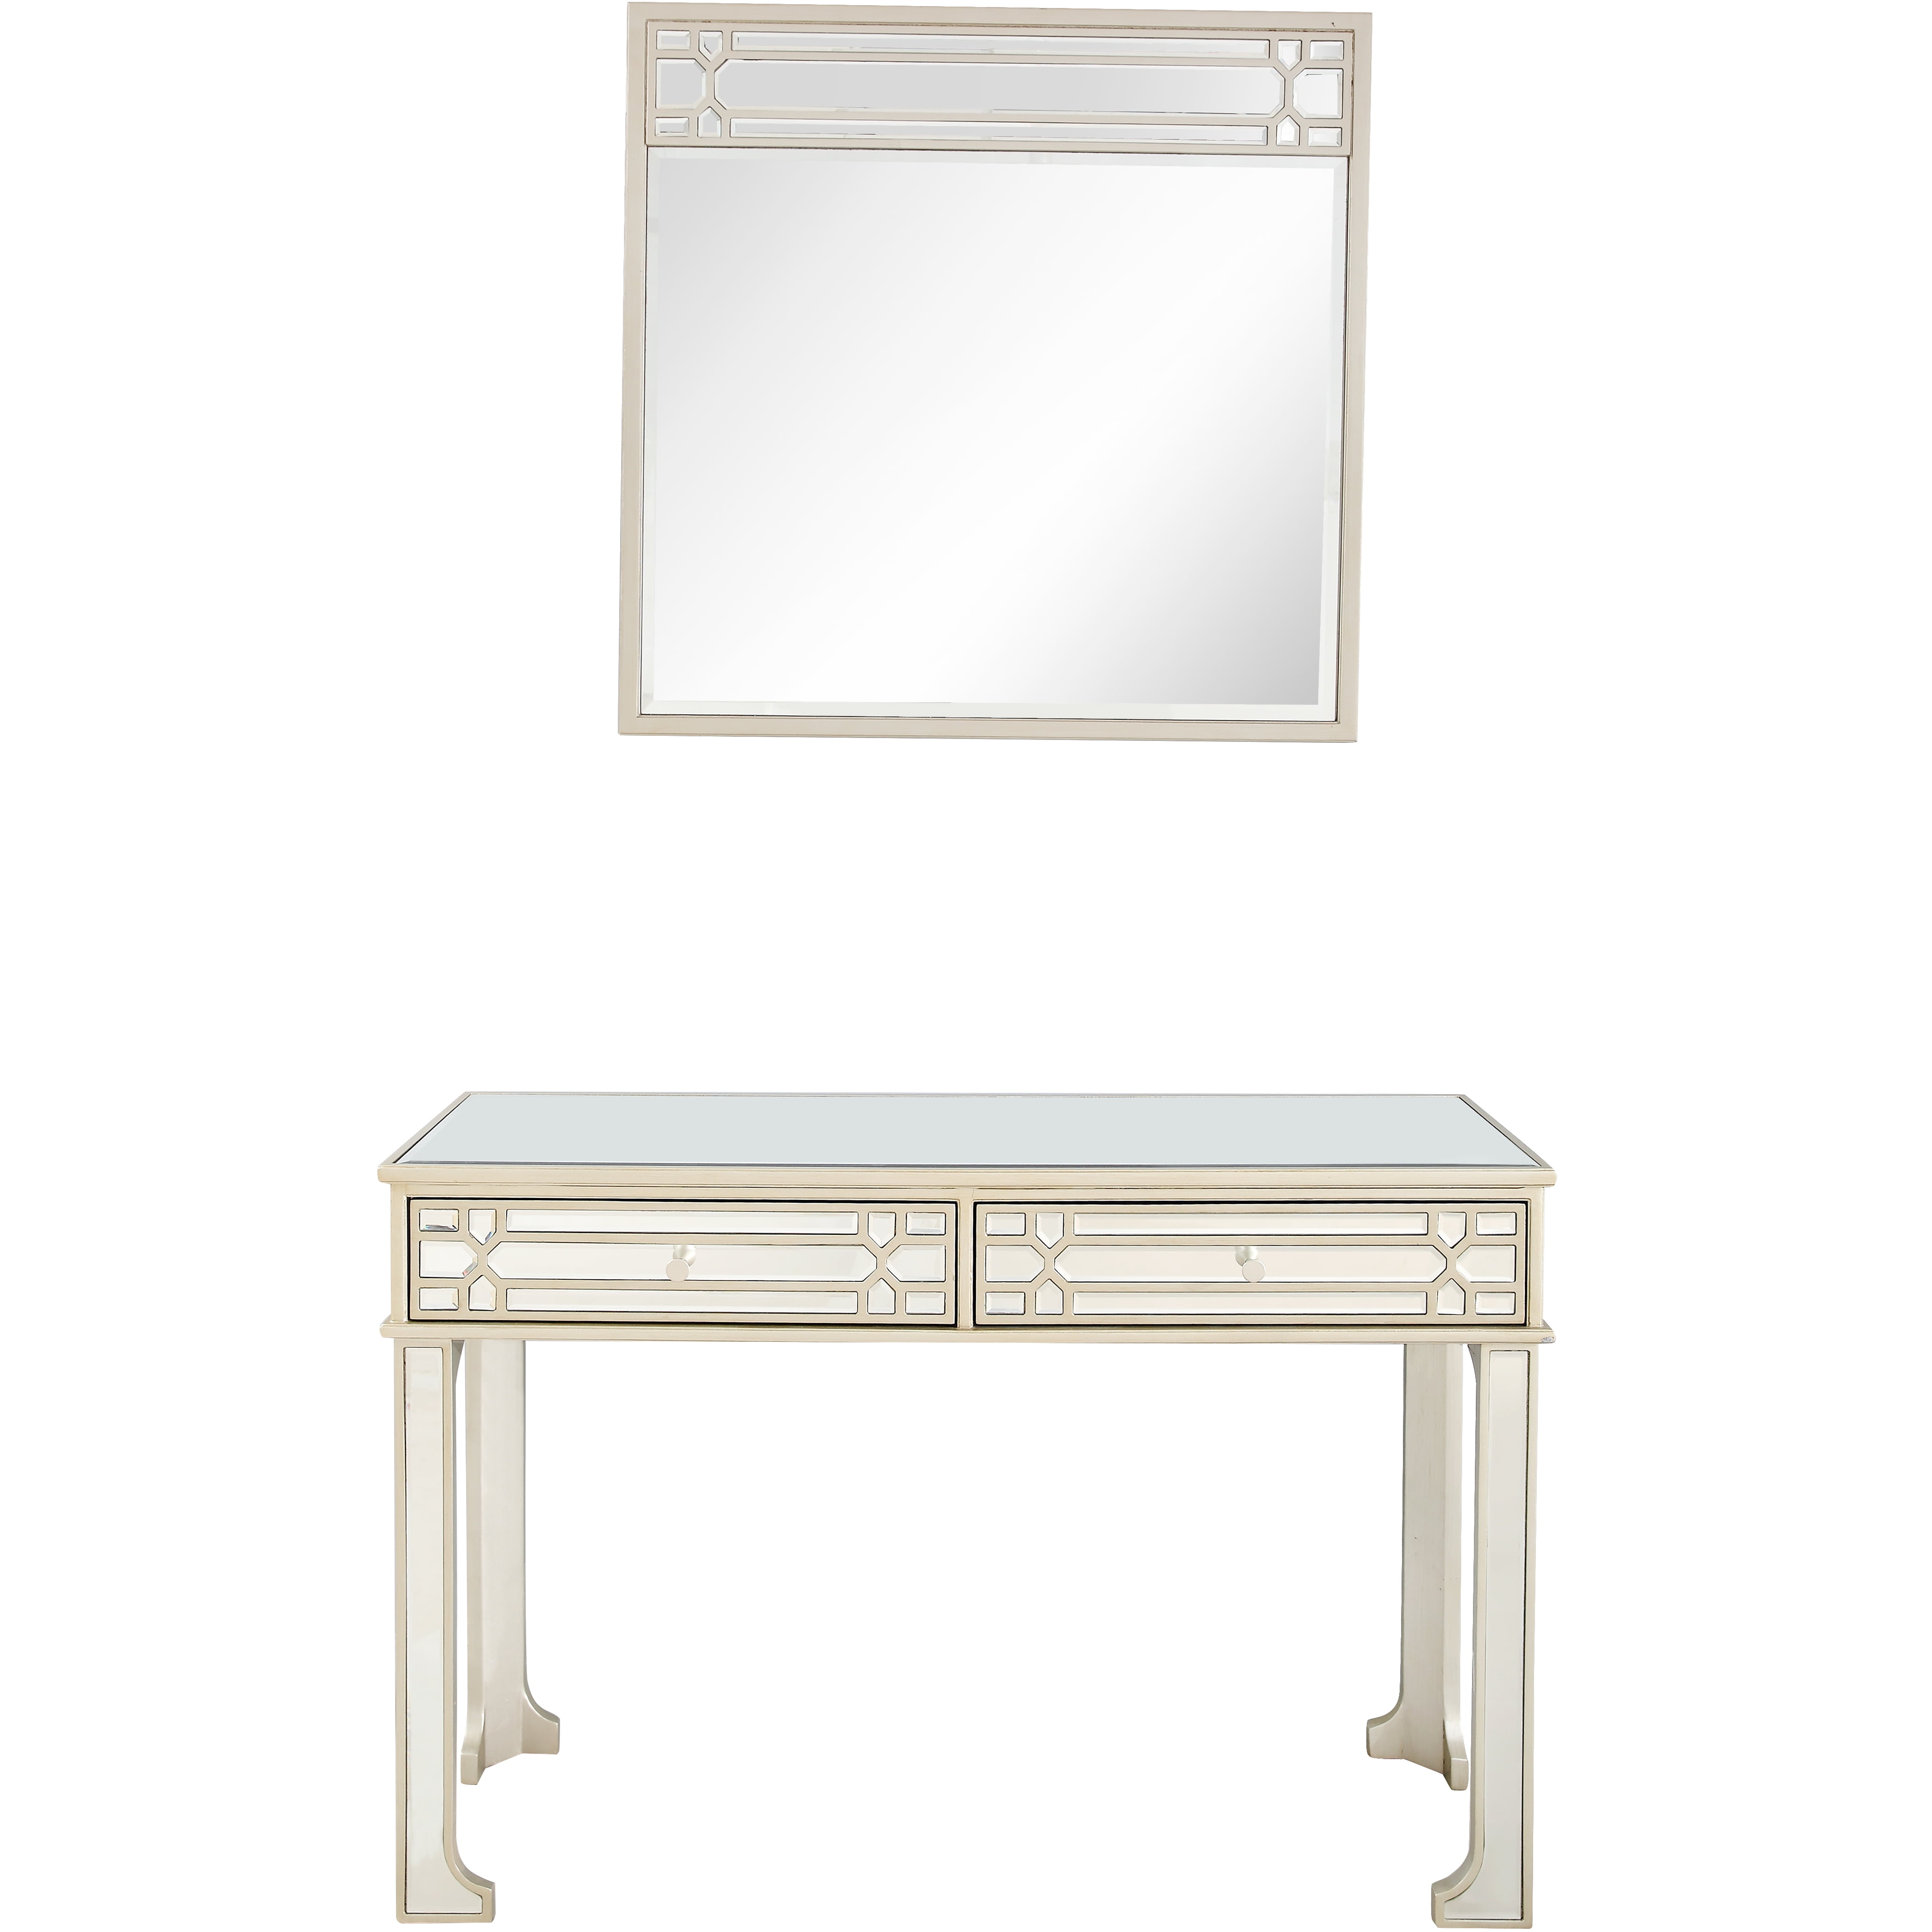 Picture of Camden Isle 86443 Aubrey Wall Mirror and Console Table